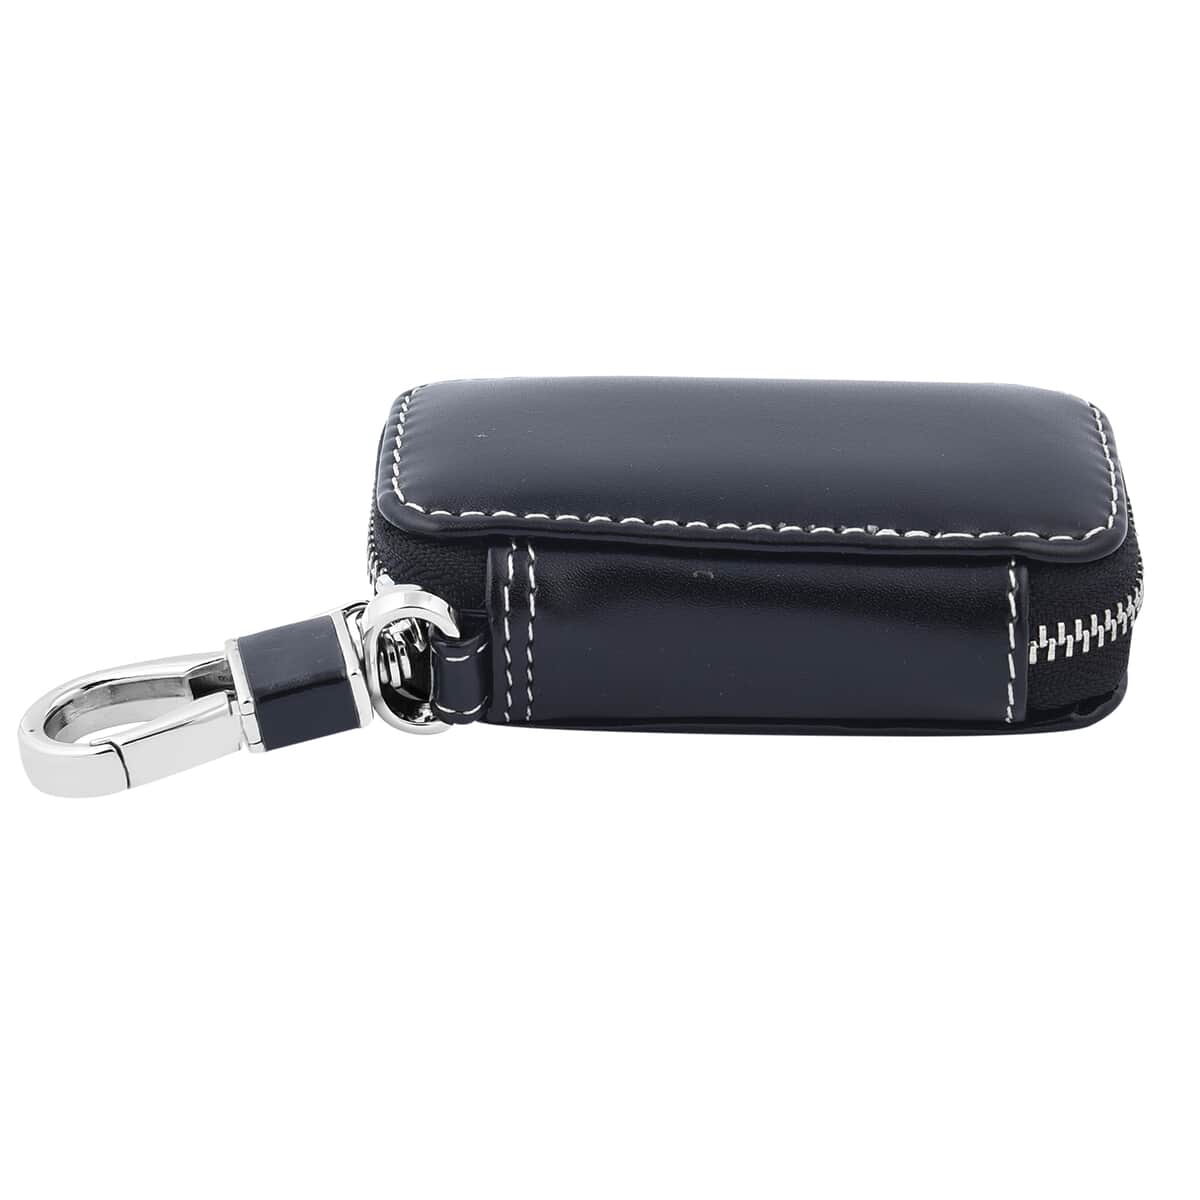 Black Square-Shaped Genuine Leather Bag With Swivel Metallic Snap Hoop, Zipper Closure, and Key-ring For Car Keys, Remote image number 4